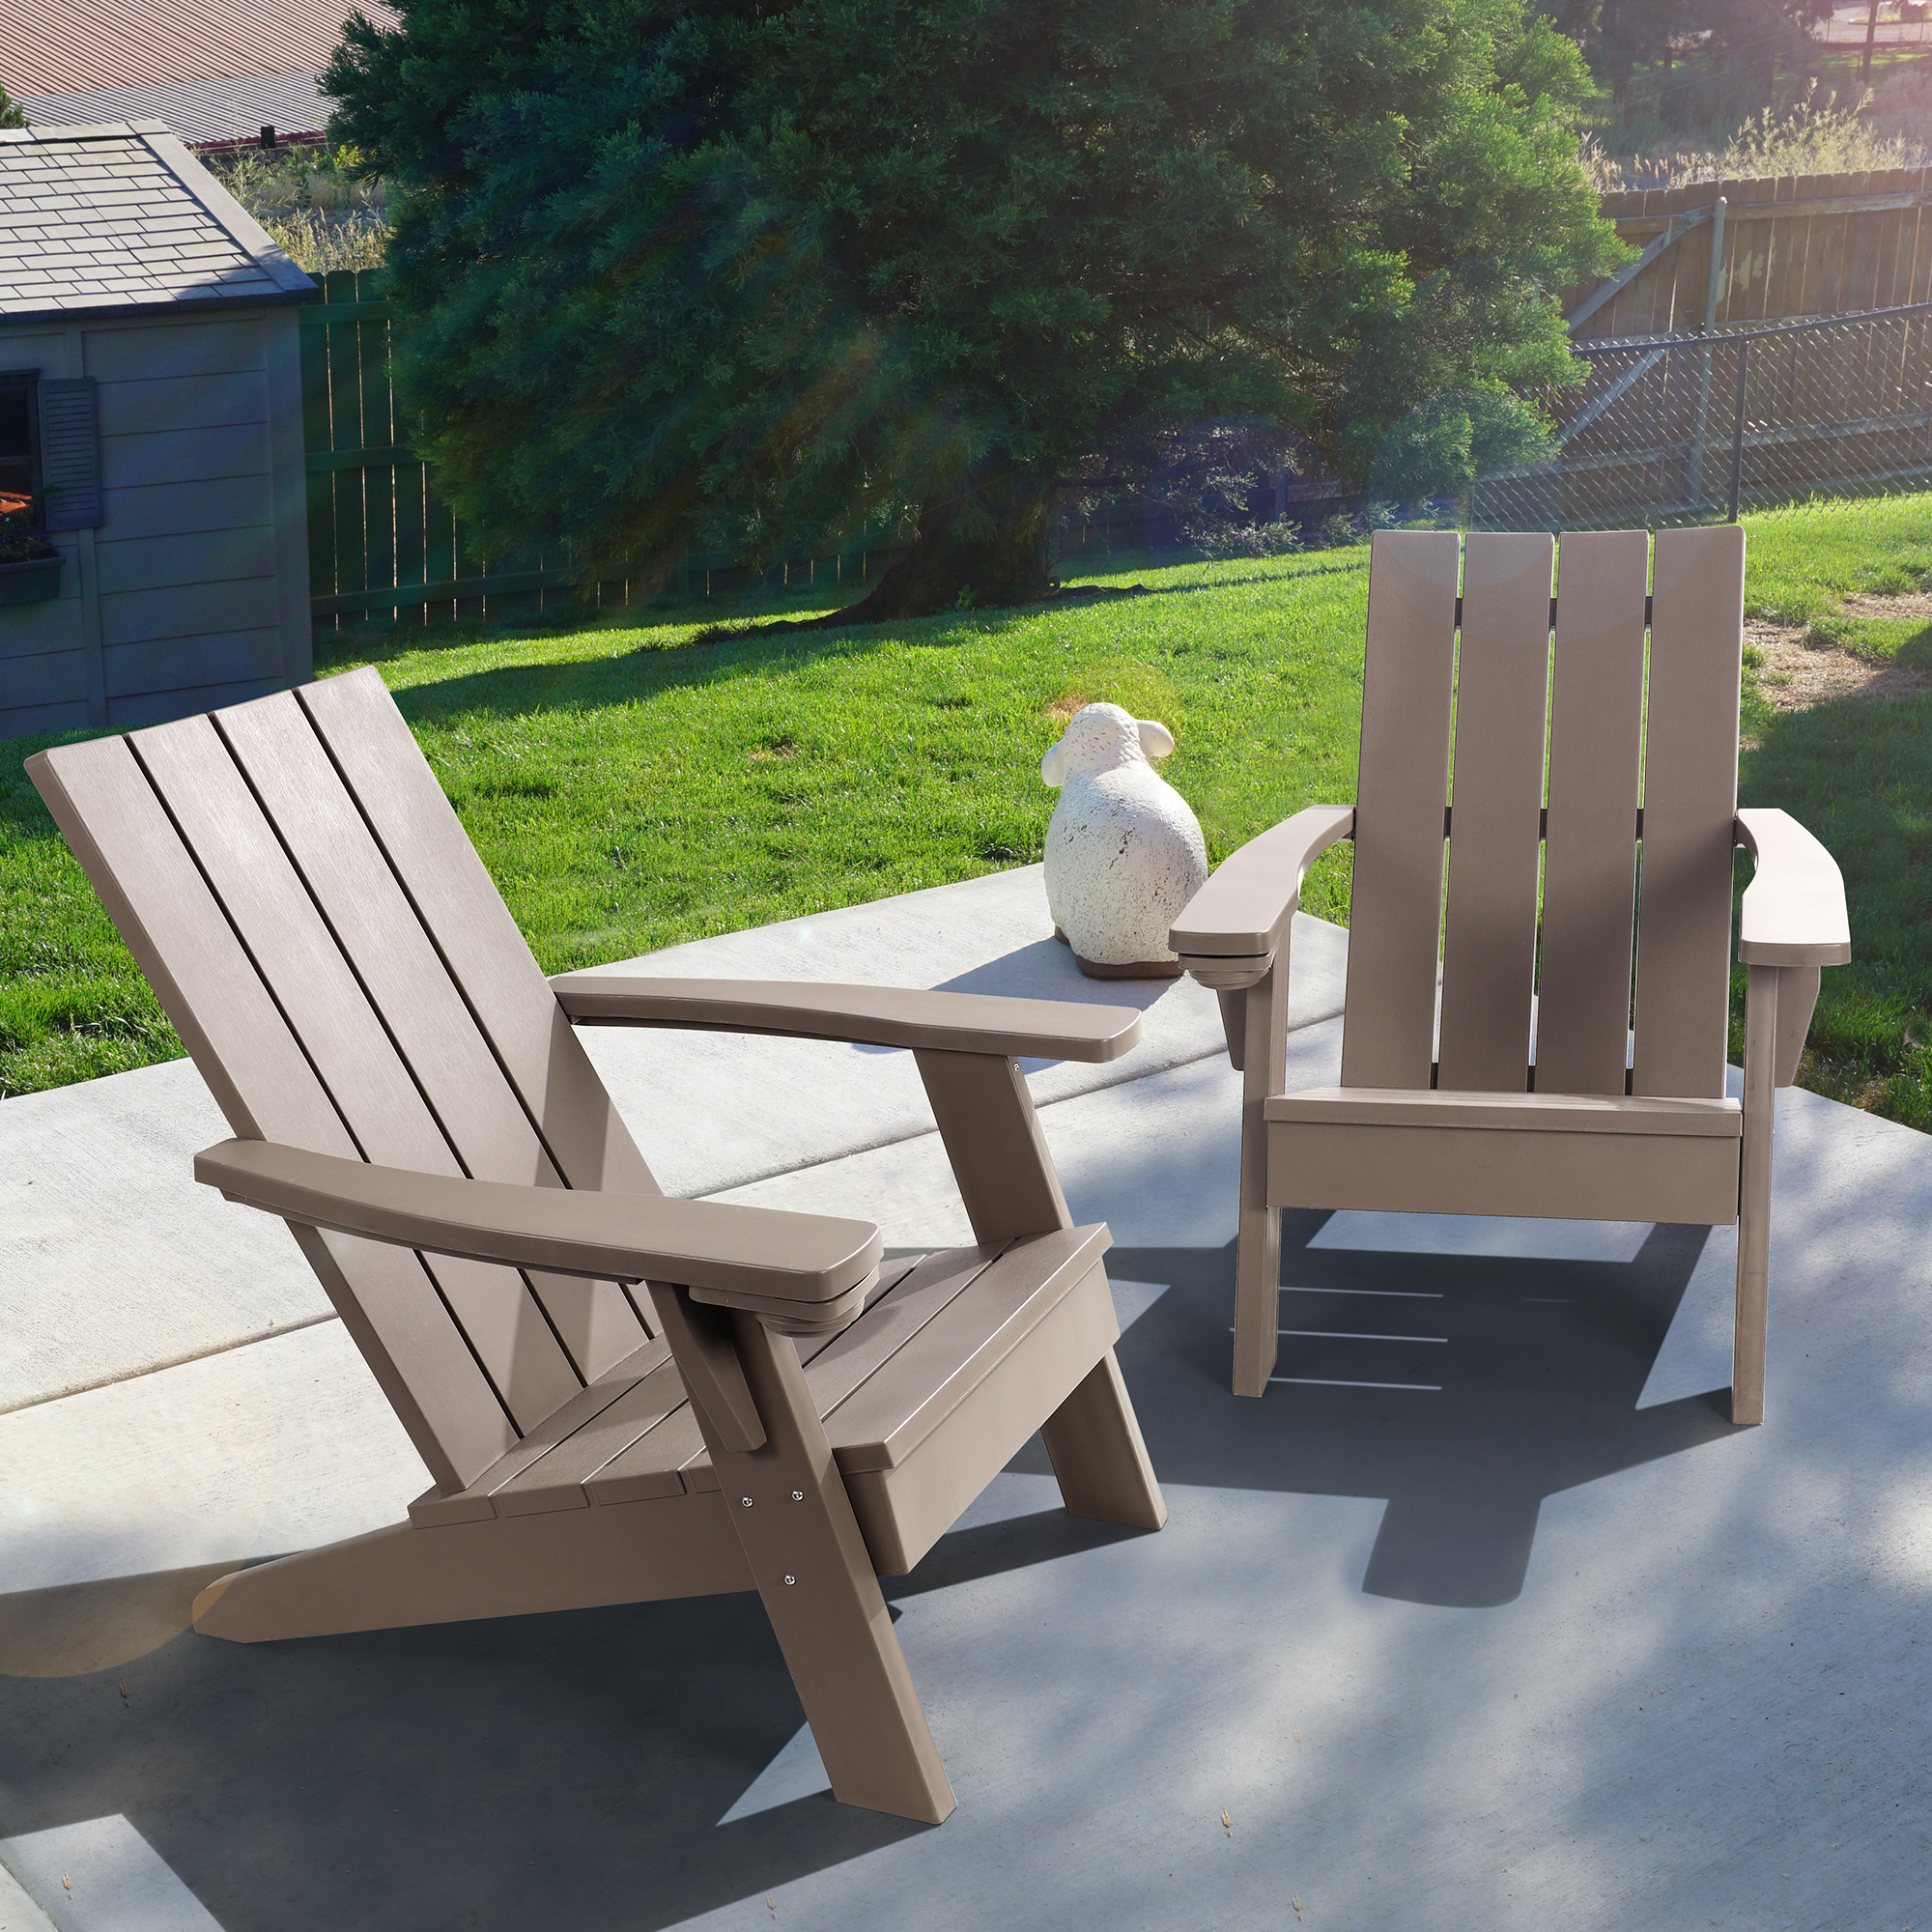 KUTIME 2PCS Adirondack Chair Outdoor Patio Chair With Cup Holder - Light Brown - image 4 of 8